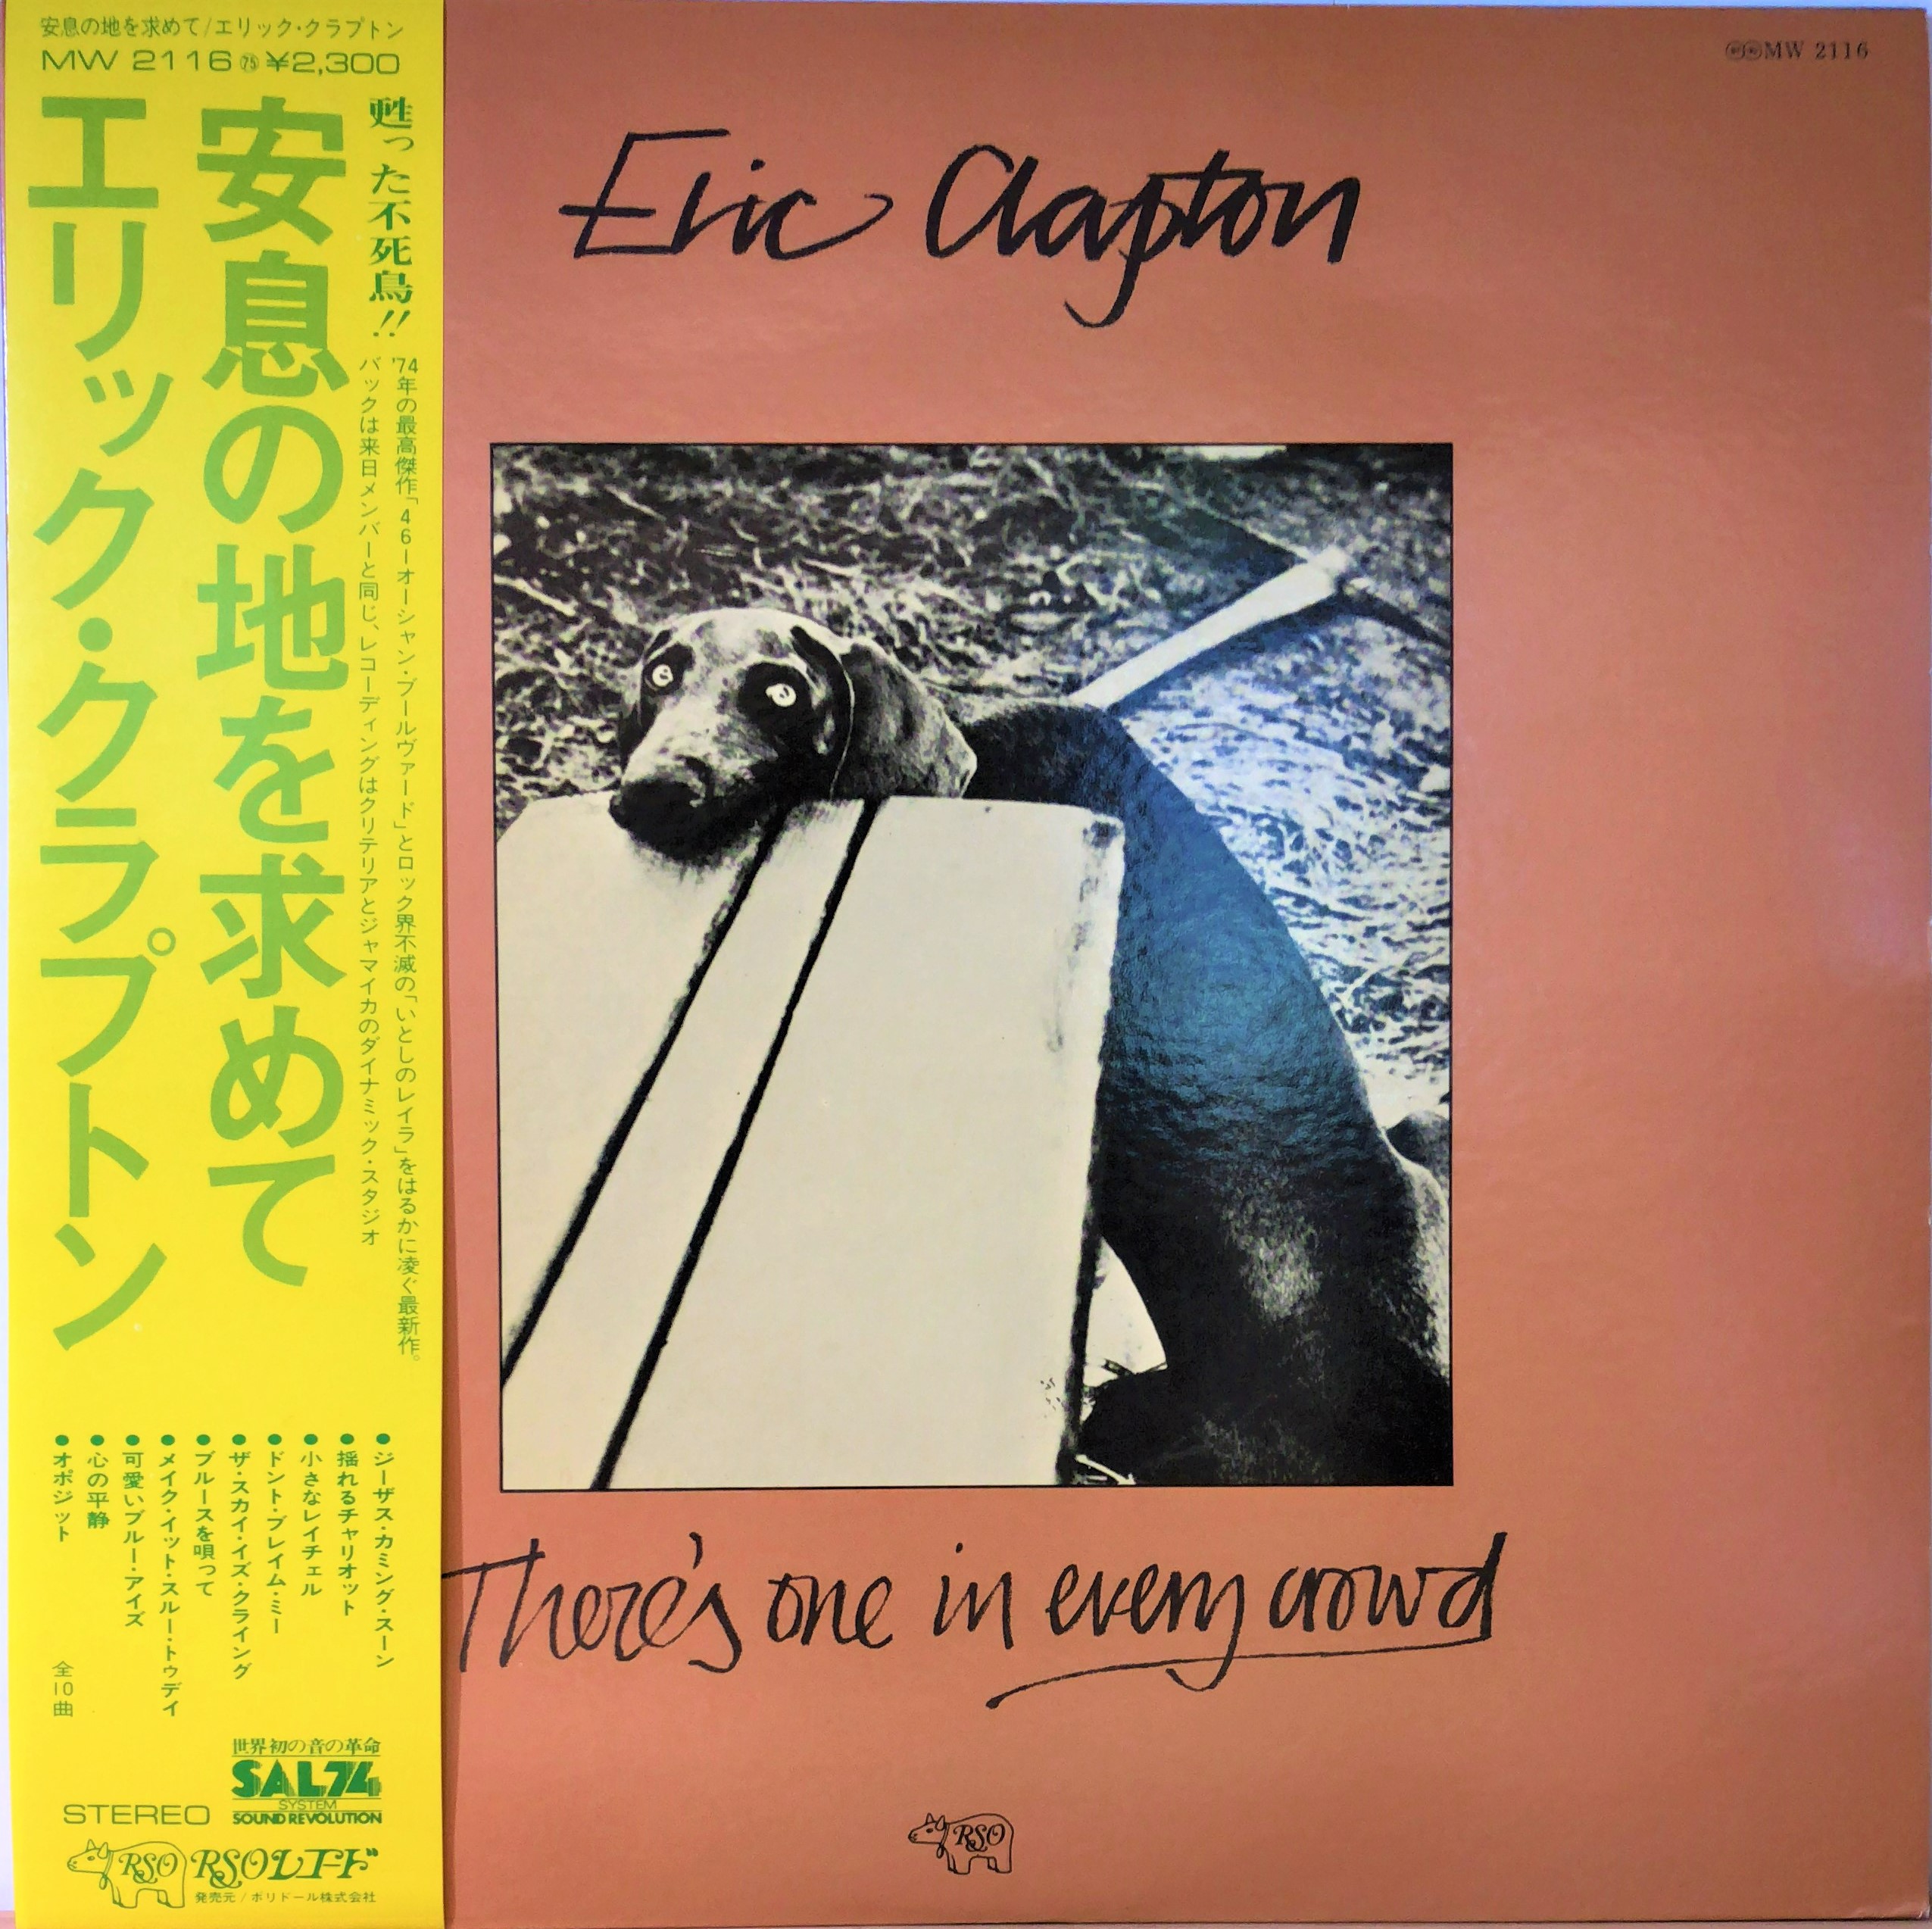 Eric Clapton ‎– There's One In Every Crowd